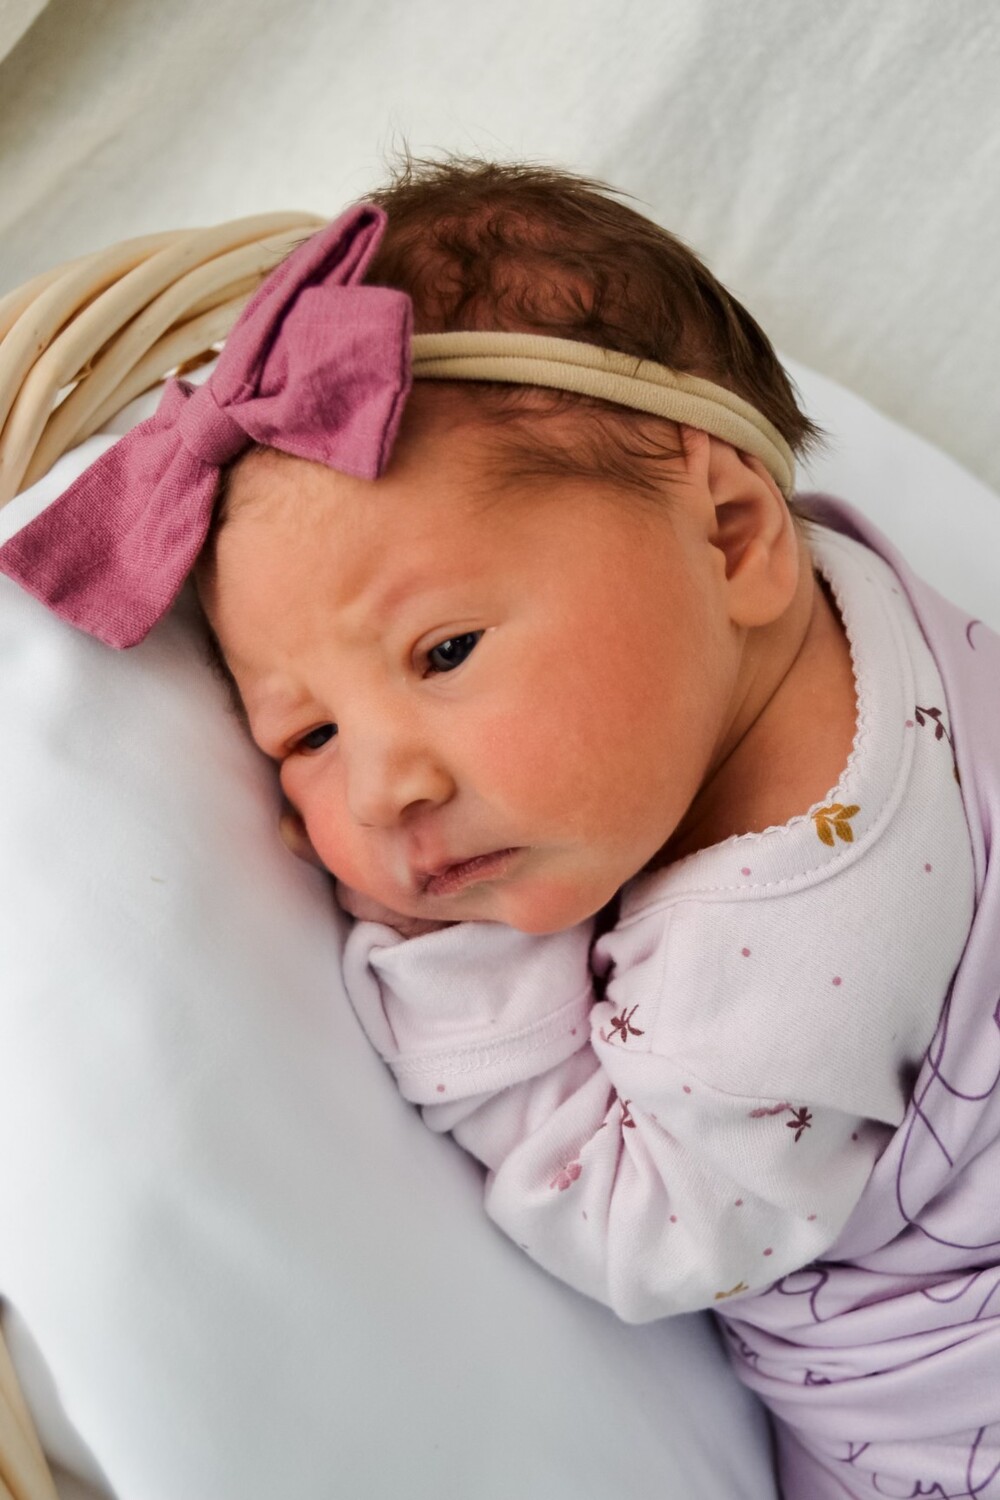 Lyla Moore was born Oct. 19 to Travis and Christine (Duffy) Moore.